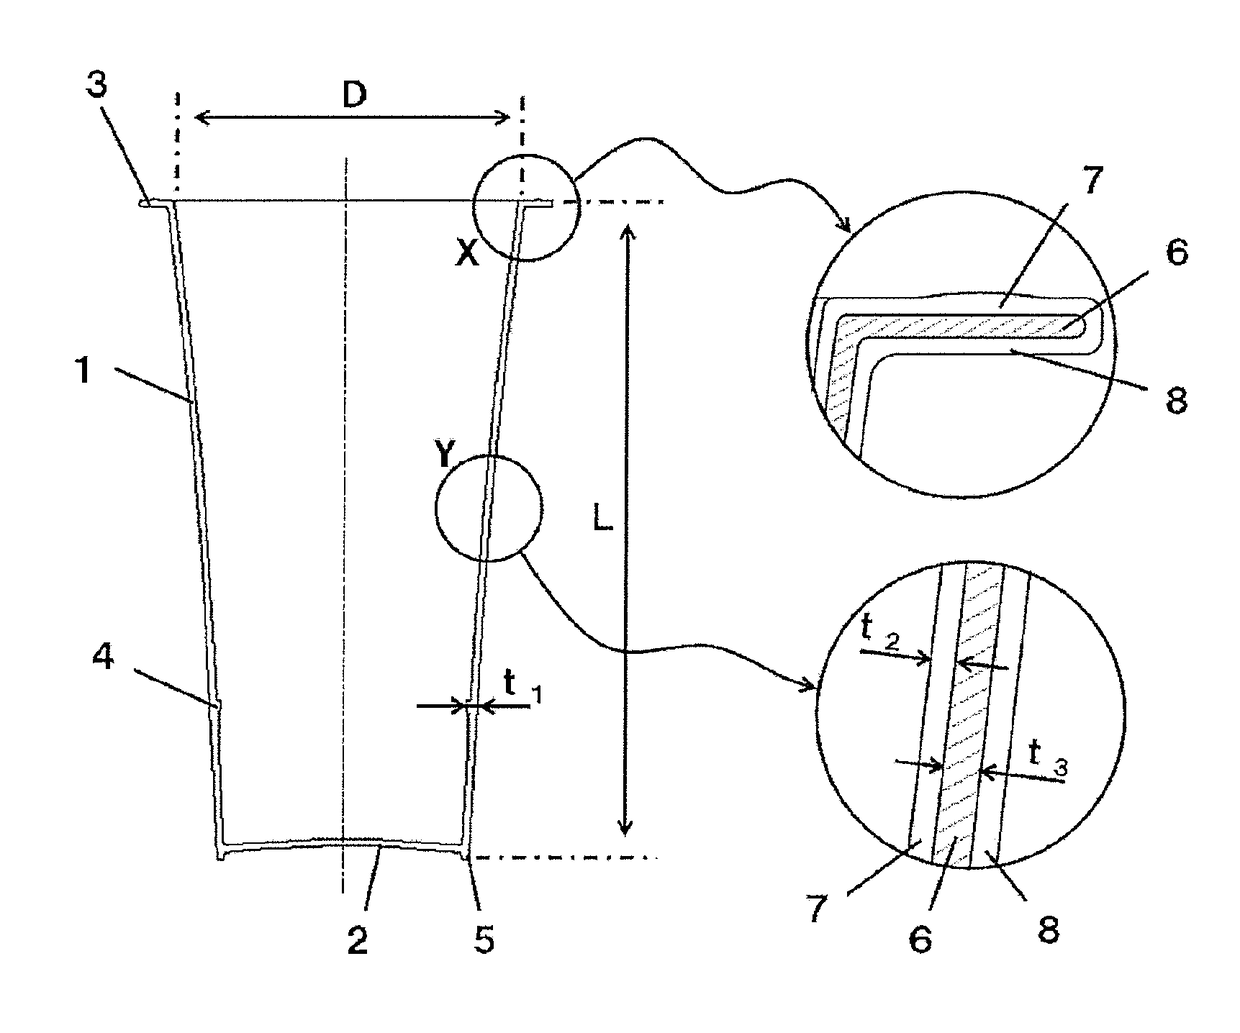 Cup-type container and method of forming the same